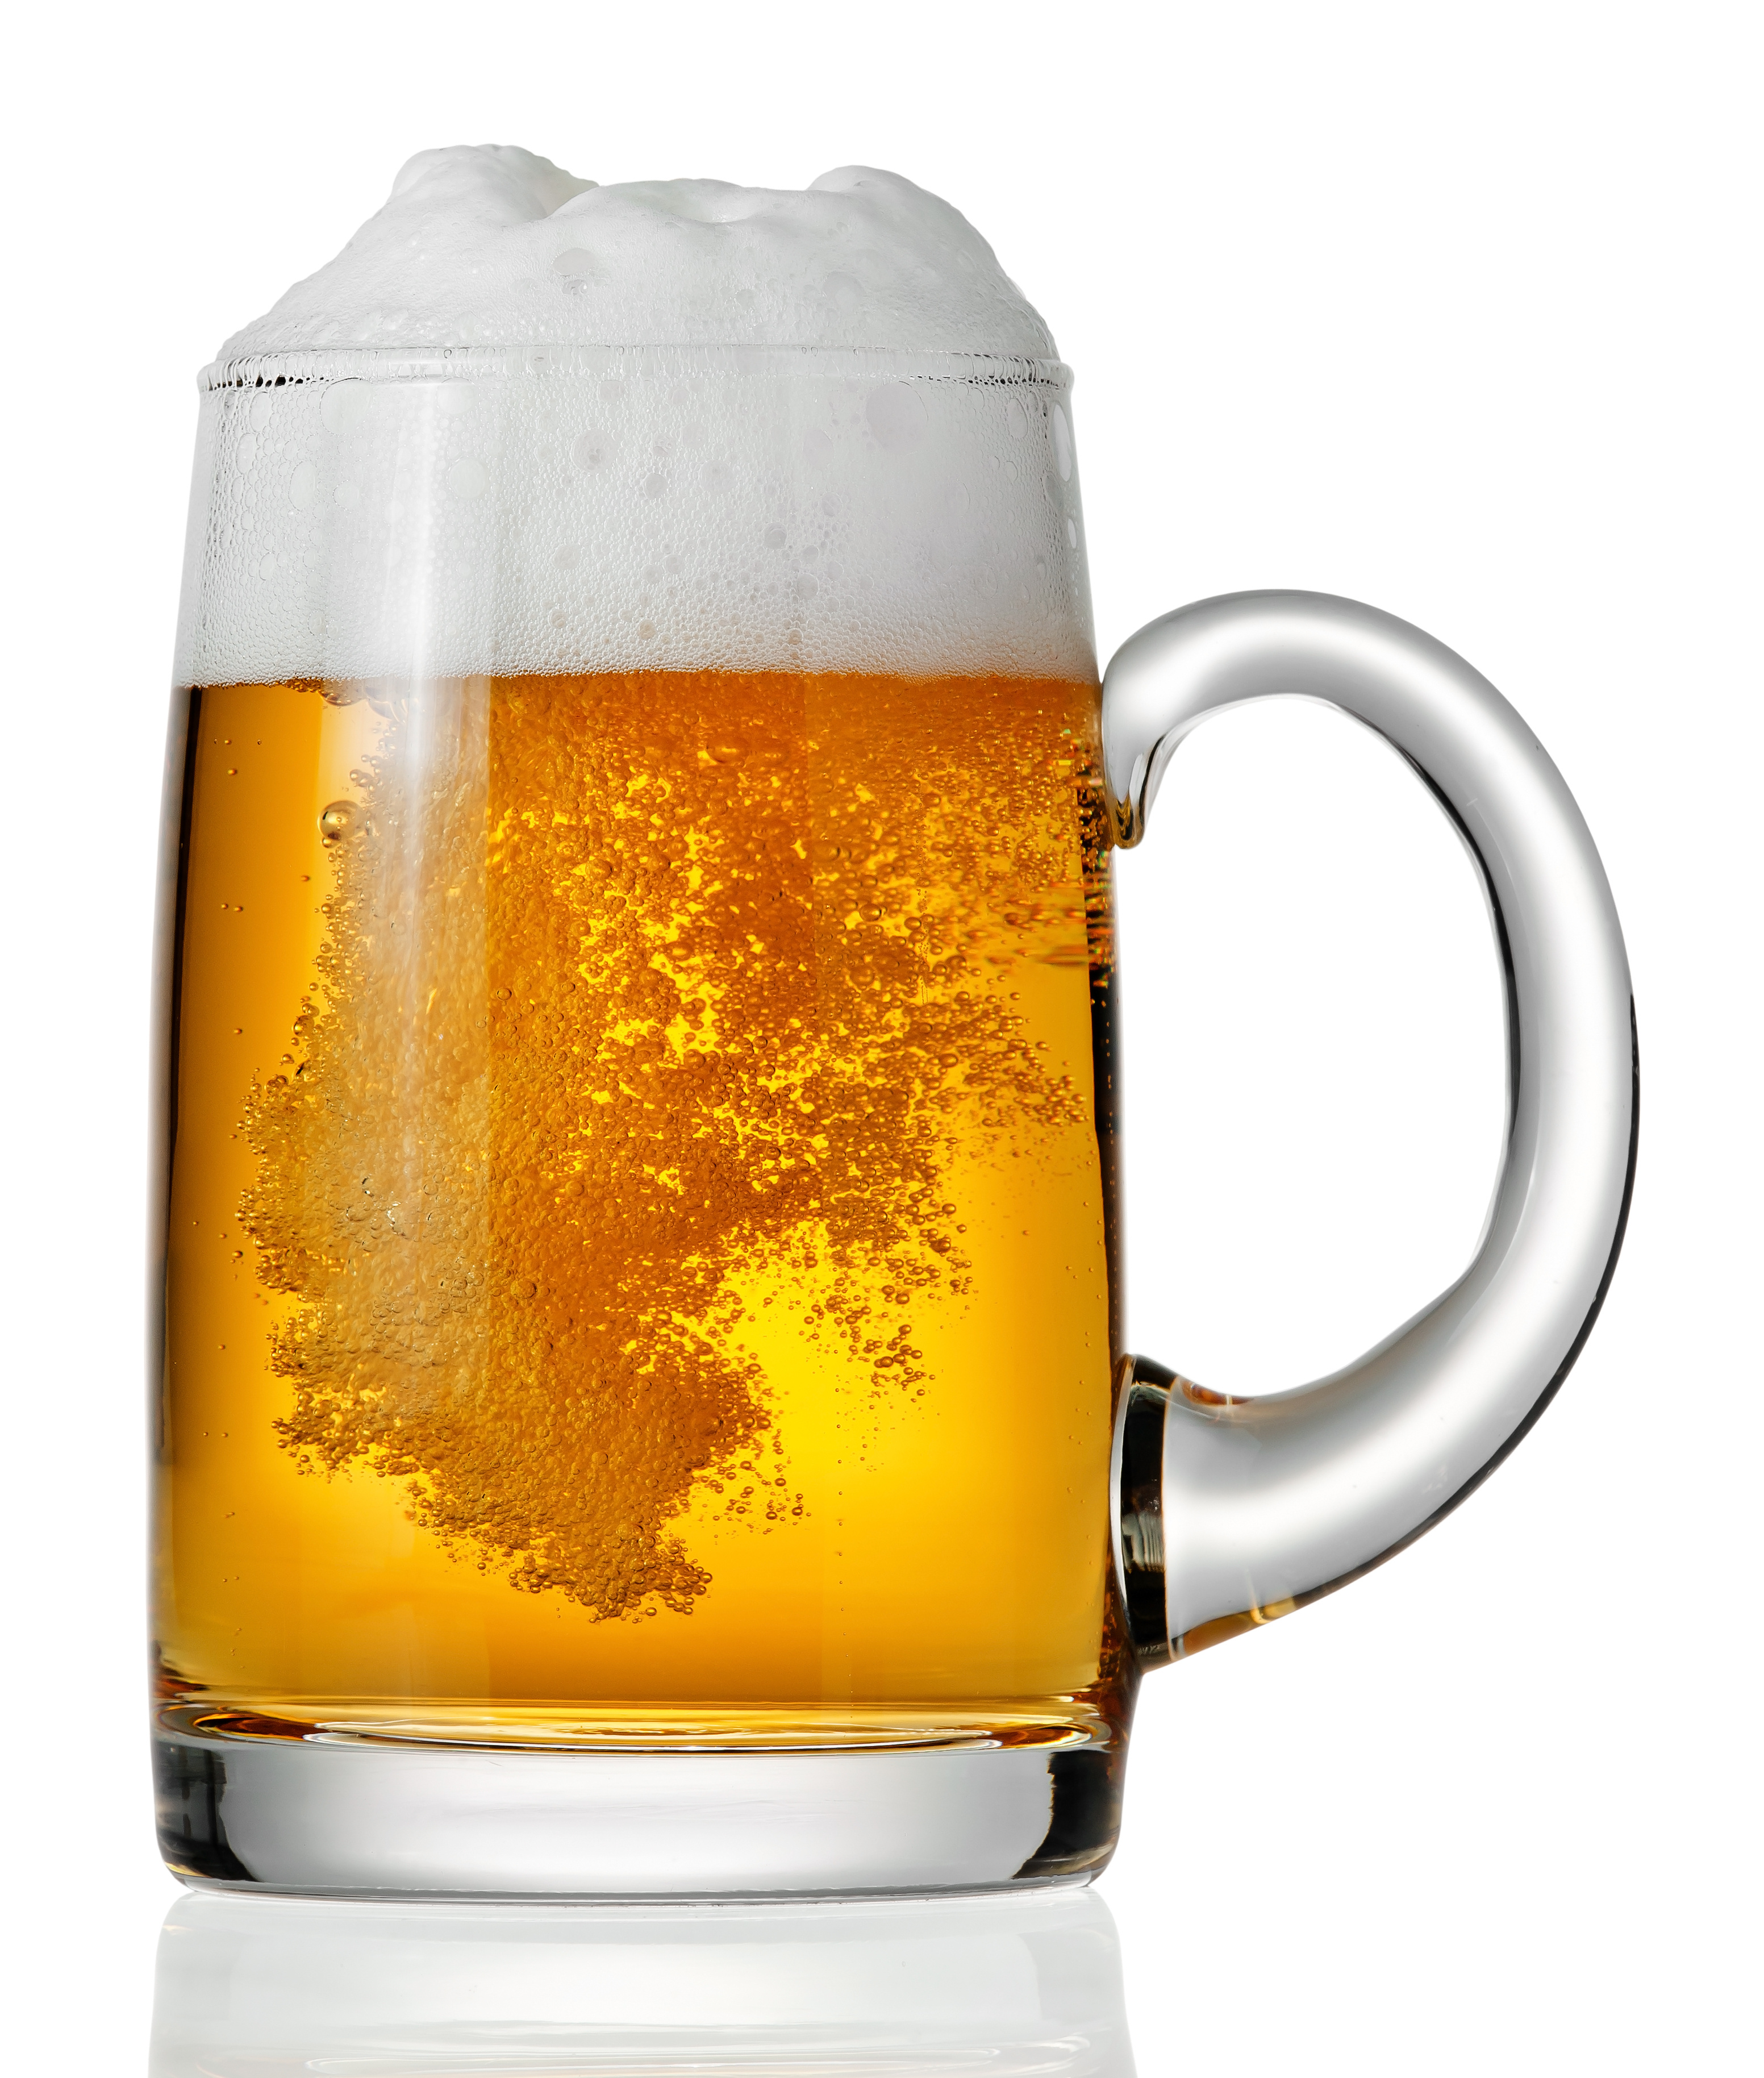 How to lose weight and still drink beer | Healthy Happy Lifestyle